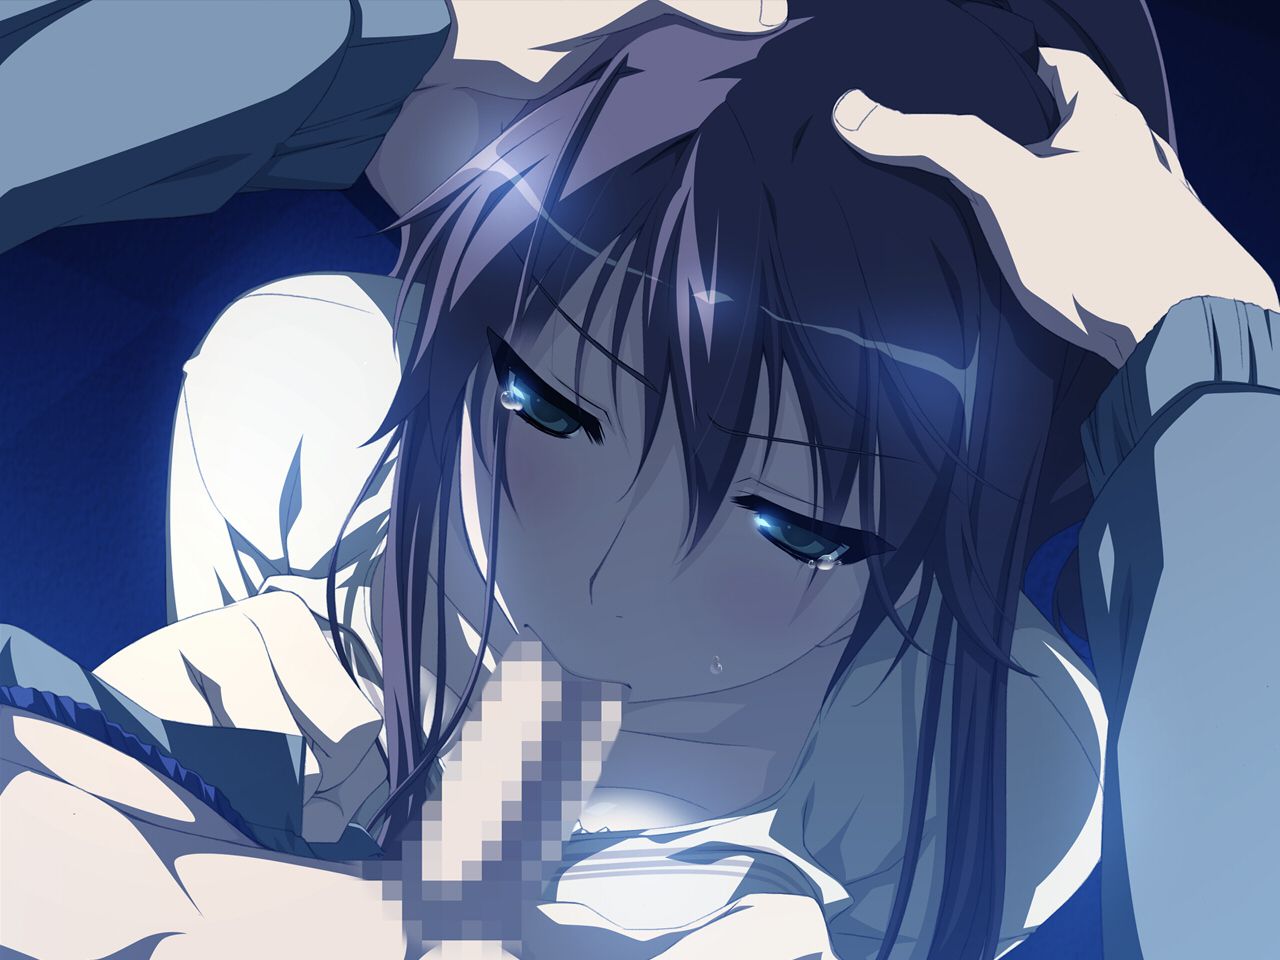 Erotic anime summary Erotic image that has you from a subjective point of view [secondary erotic] 22